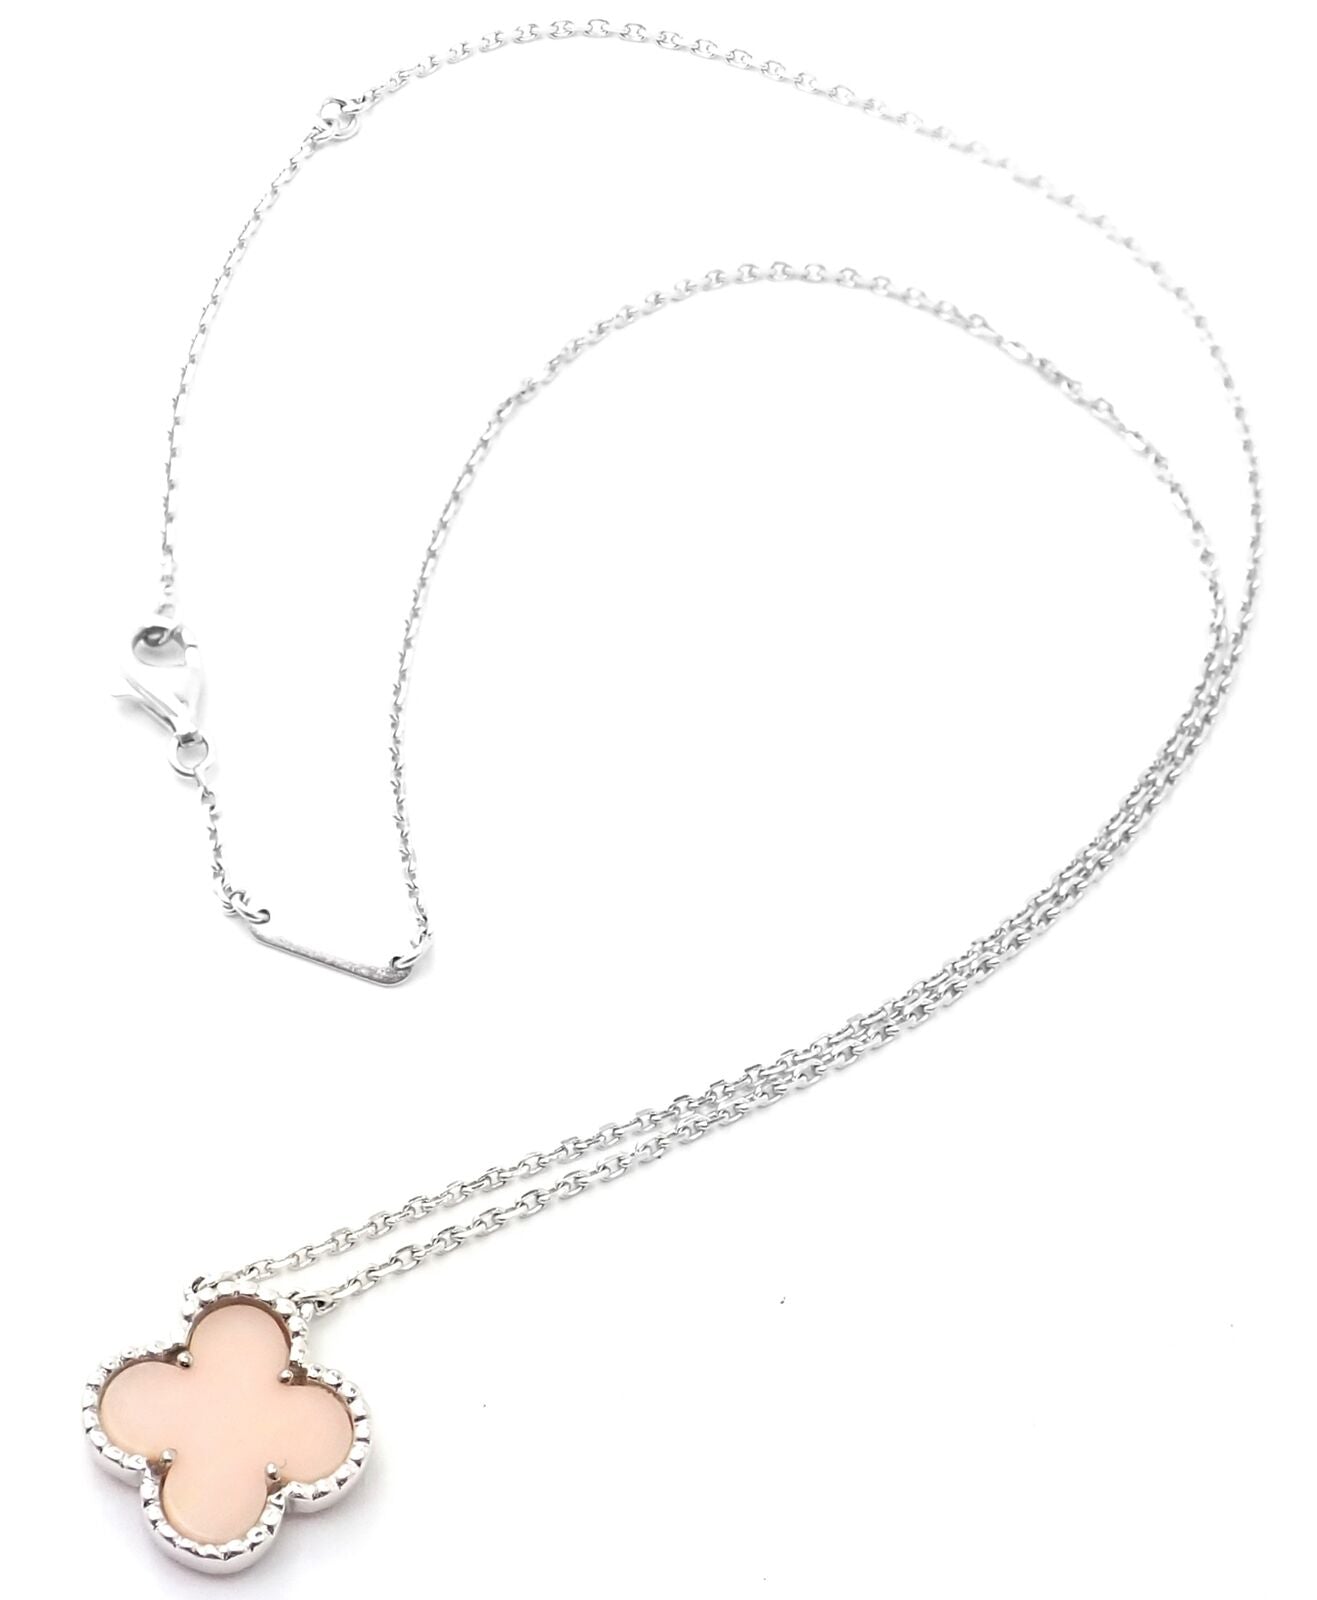 Van Cleef & Arpels Jewelry & Watches:Fine Jewelry:Necklaces & Pendants Authentic! Van Cleef & Arpels Alhambra 18k White Gold Pink Opal Pendant Necklace